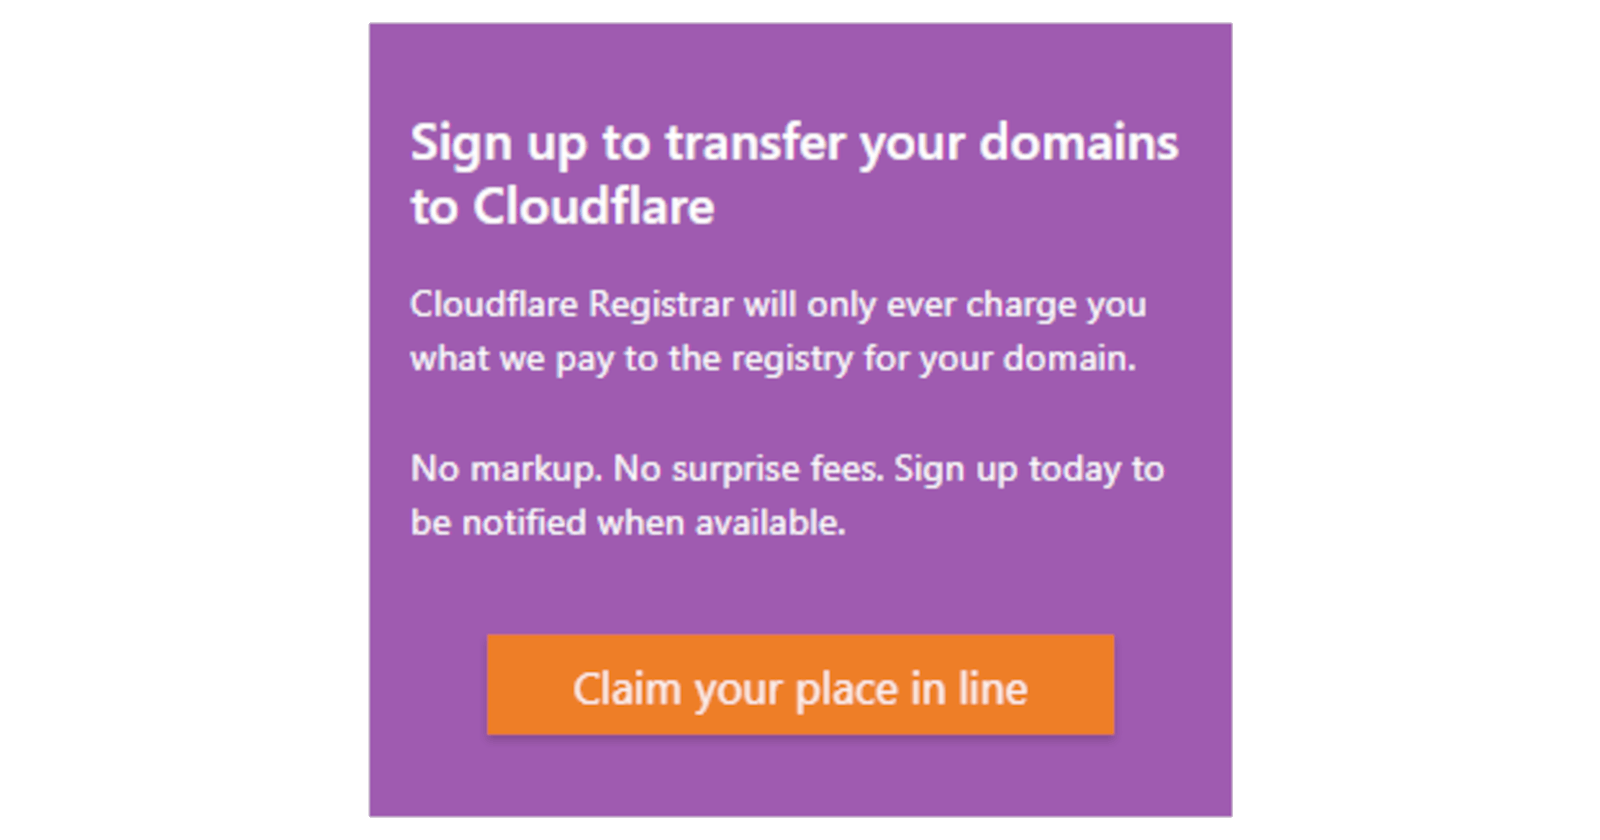 We can now register domains with Cloudflare